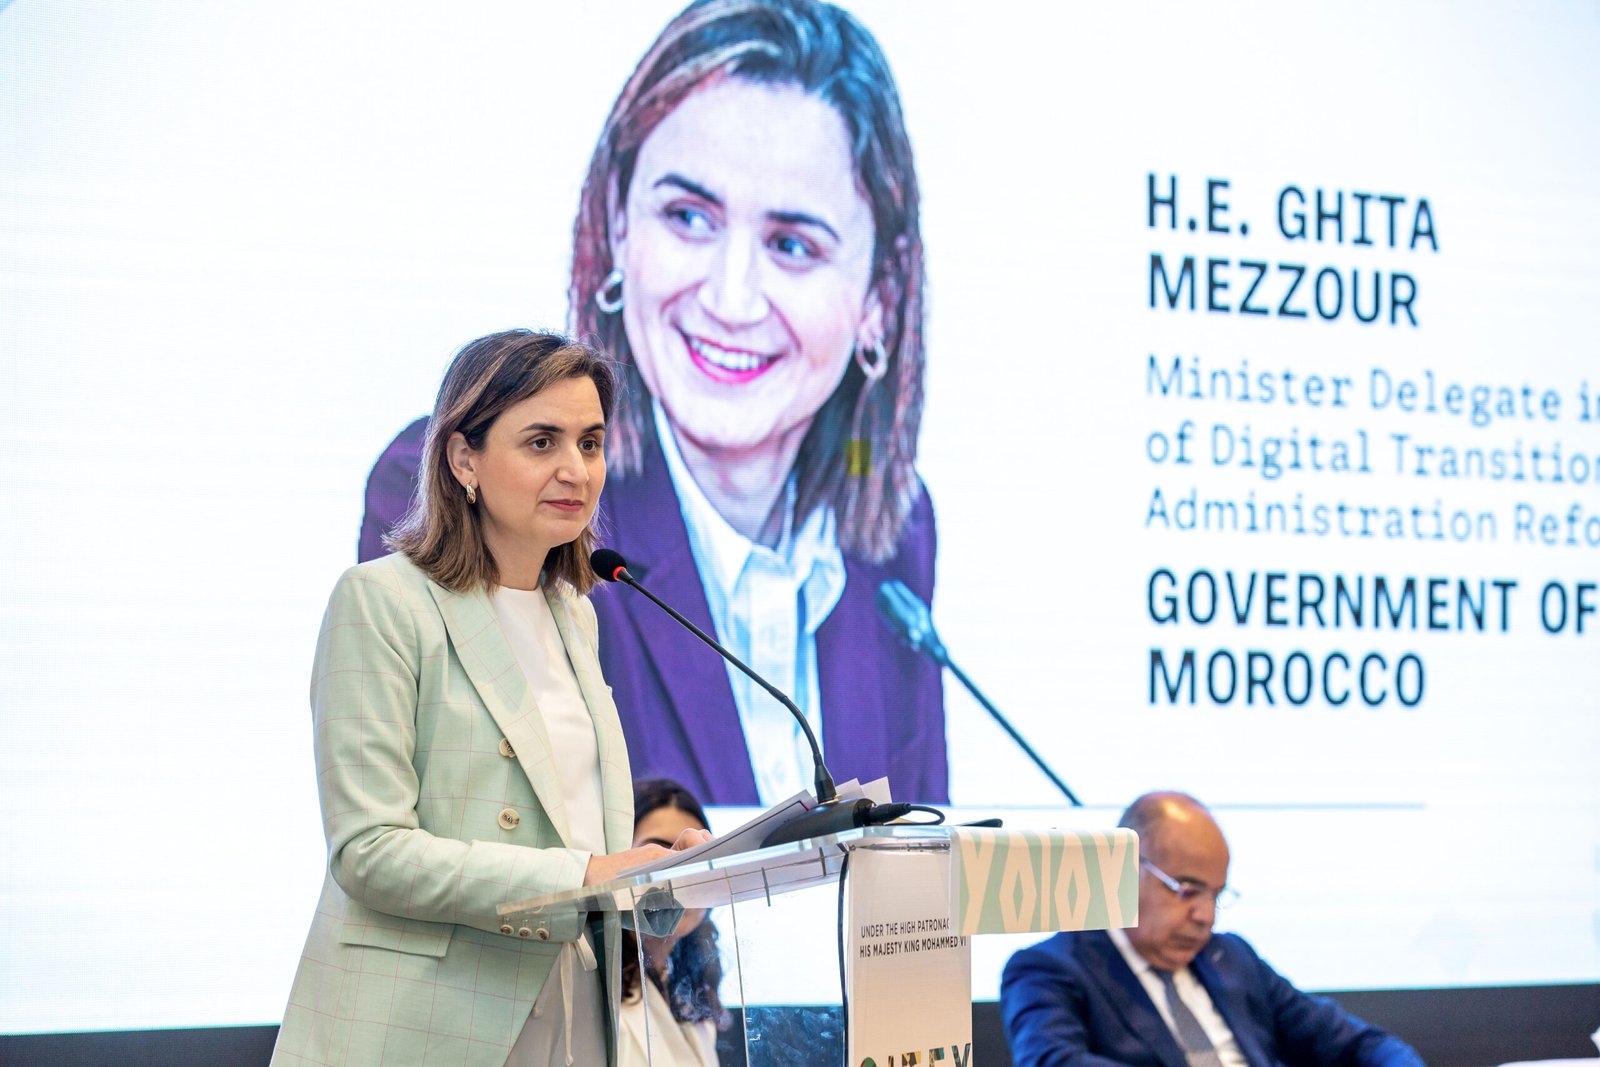 H.E Dr Ghita Mezzour, Minister of the Moroccan Ministry of Digital Transition and Administration Reform (1)